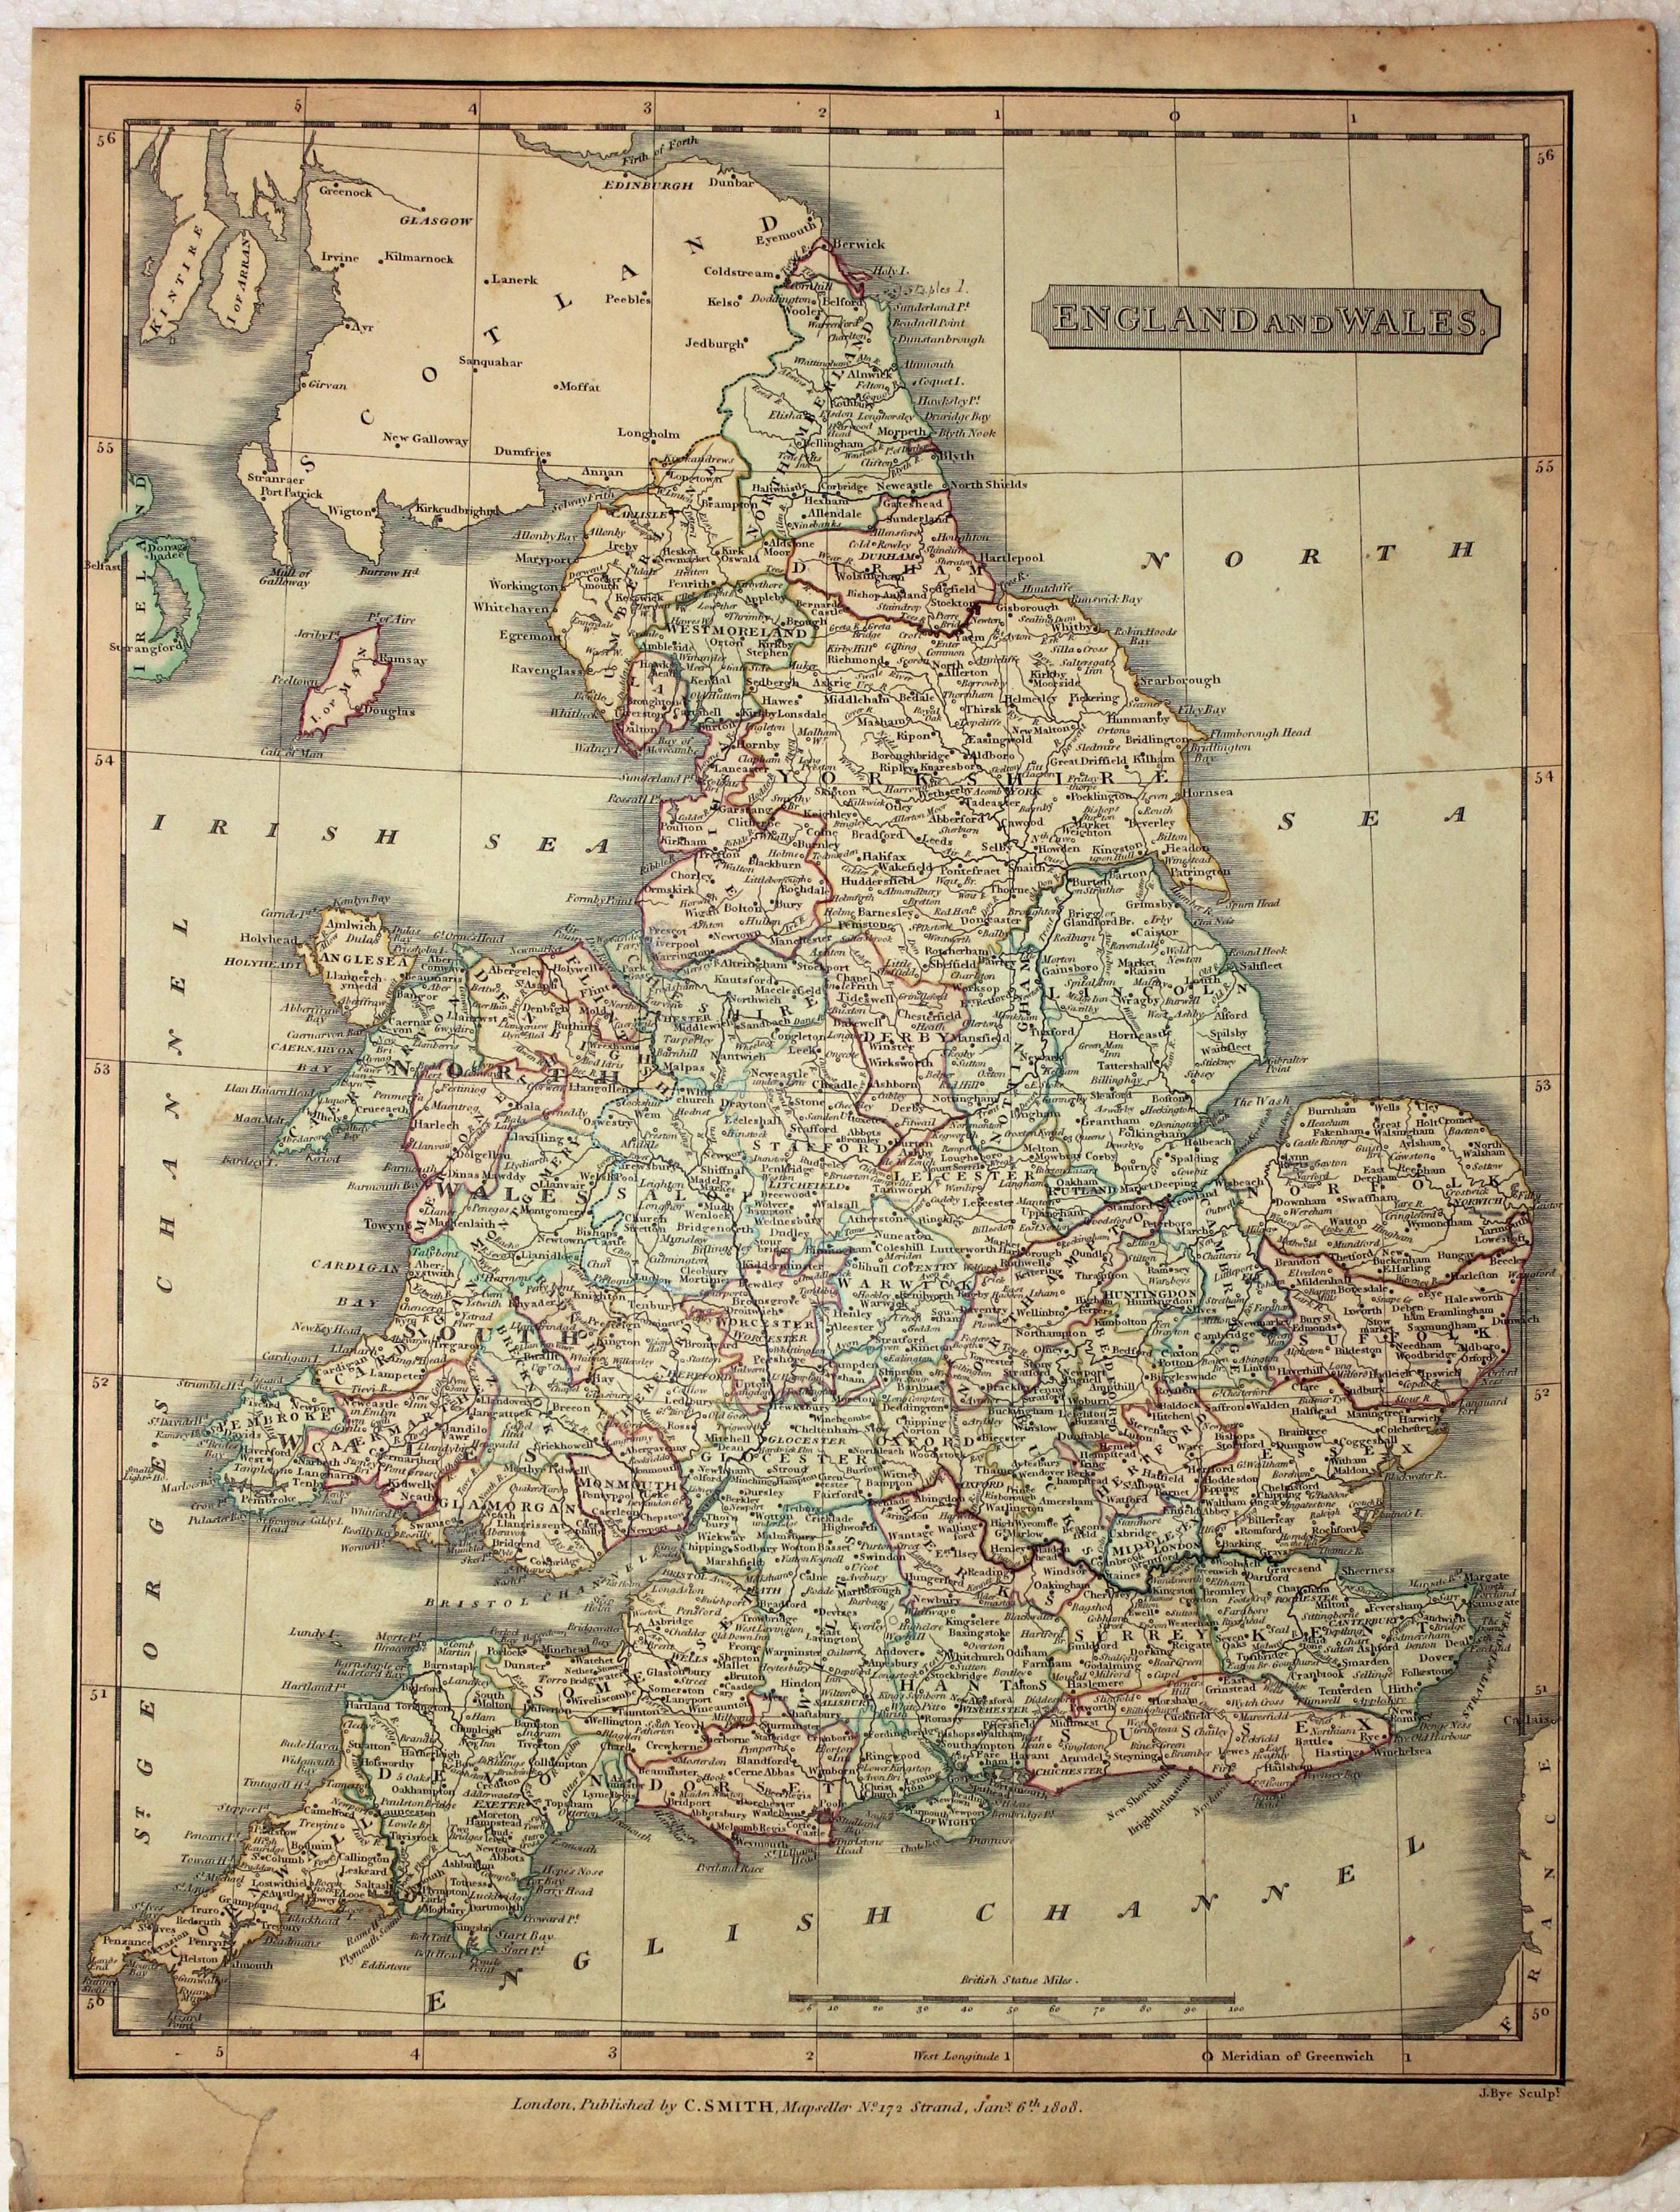 Map Uk Old 10 1/4 x 13 3/4 inches. Original outline and wash hand colouring. Lightly toned. Tear in the bottom blank margin repaired on versowith old patch of paper.